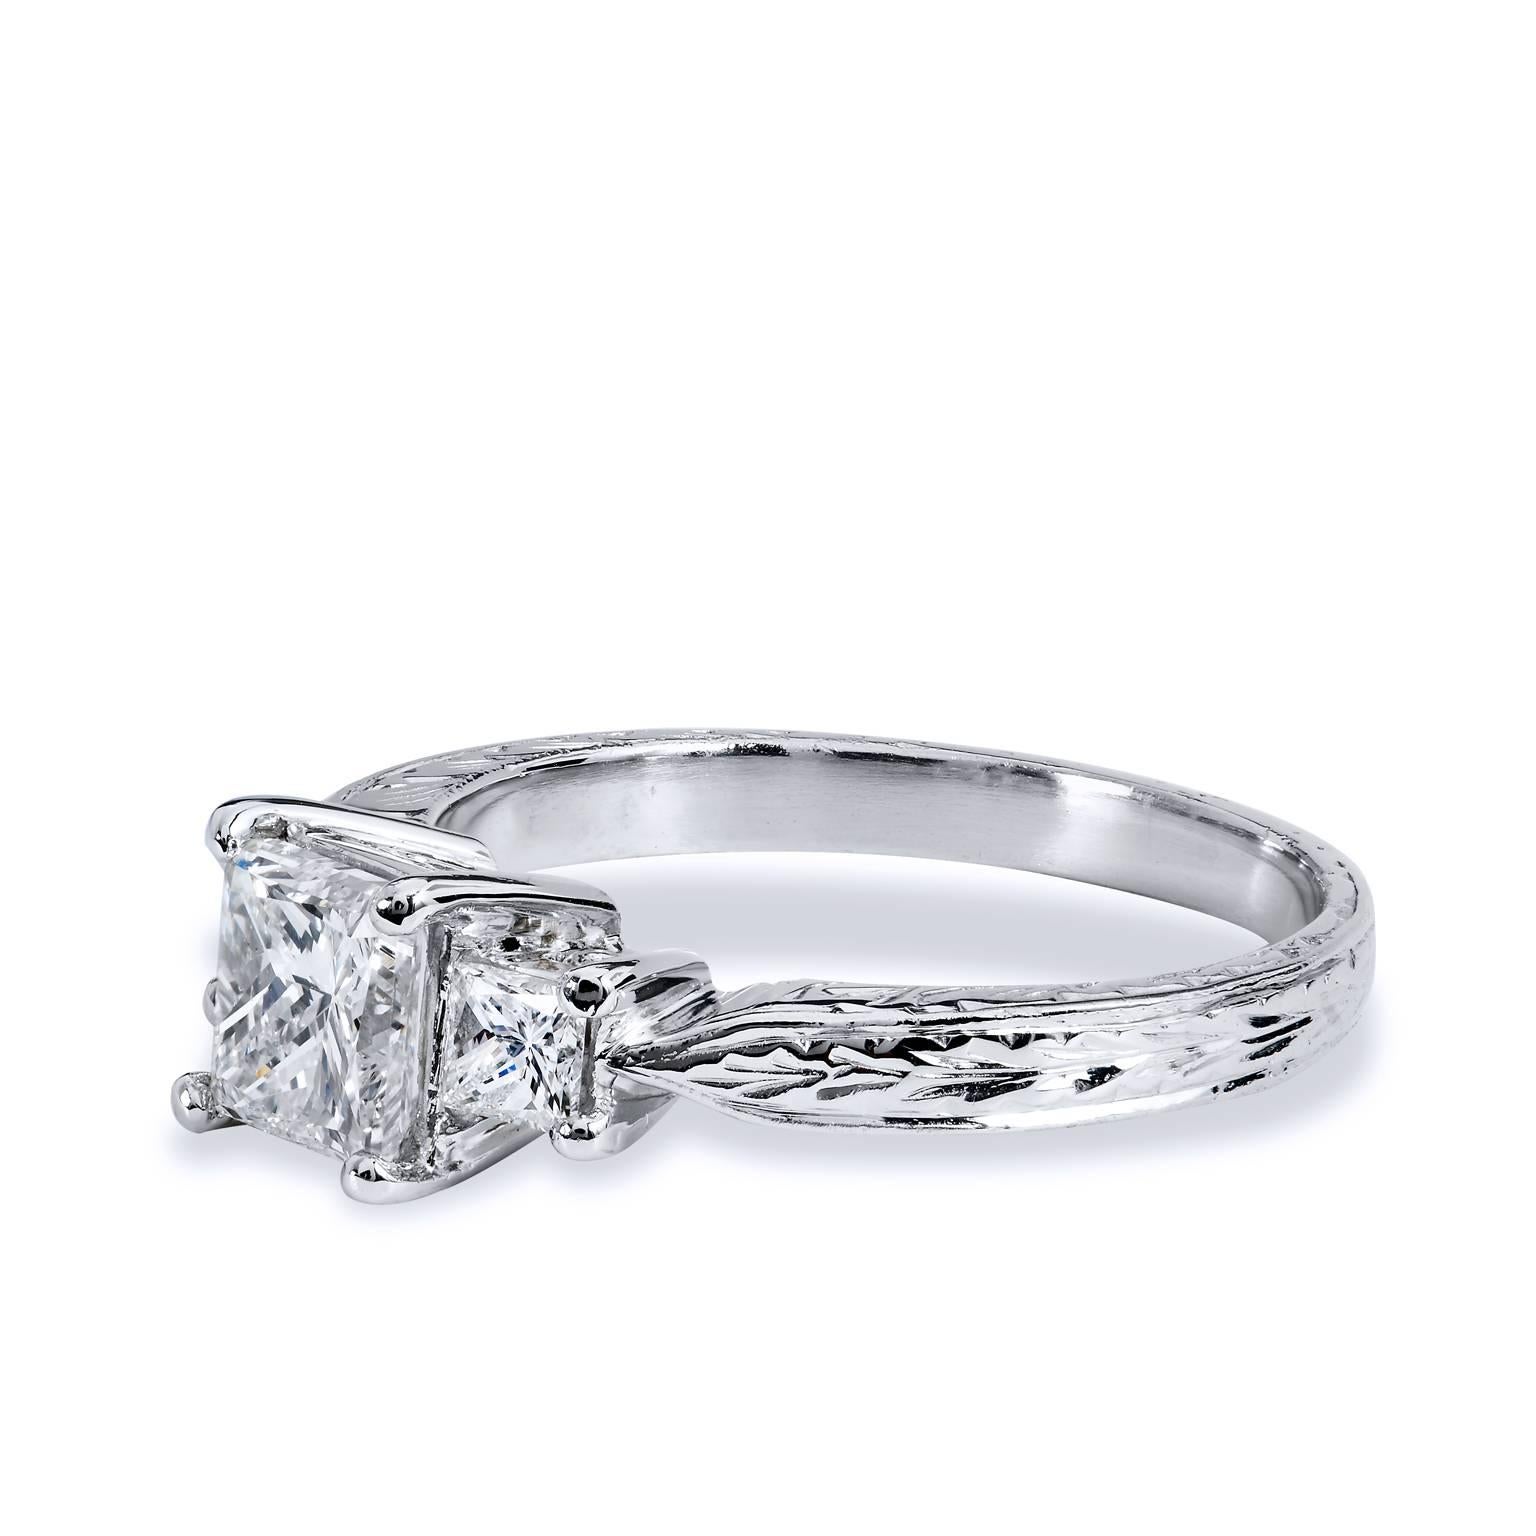 GIA Certified 1.26 Carat Diamond Three Stone Princess Cut Engagement Ring Size 7

This estate spectacular three-diamond platinum engagement ring features a 1.00 carat Princess cut diamond affixed at center (L/VS2; GIA #5171155030) with two 0.26